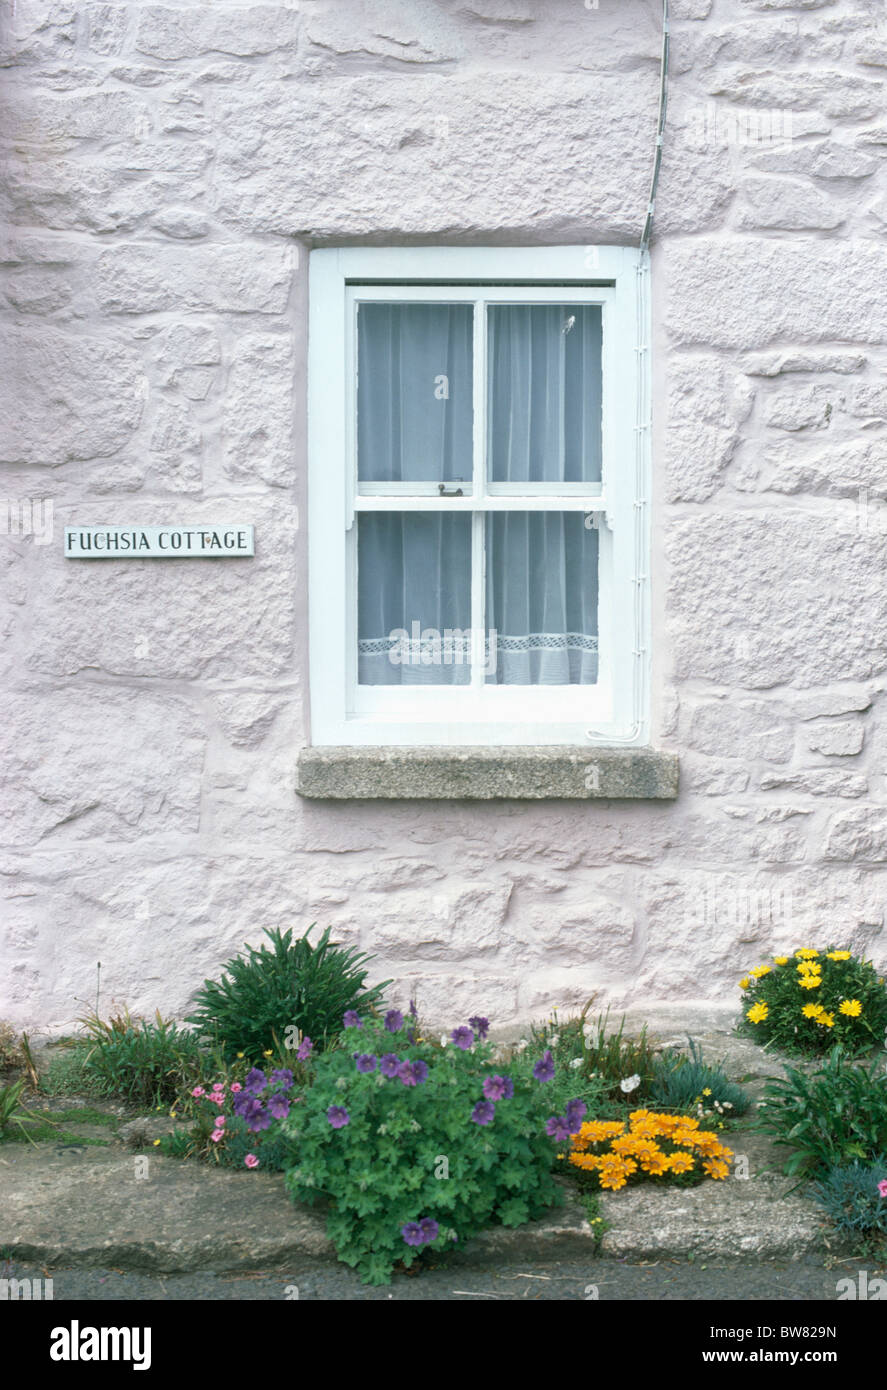 Yellow flowering plants in small border below white painted cottage with sash window and interior net curtain Stock Photo